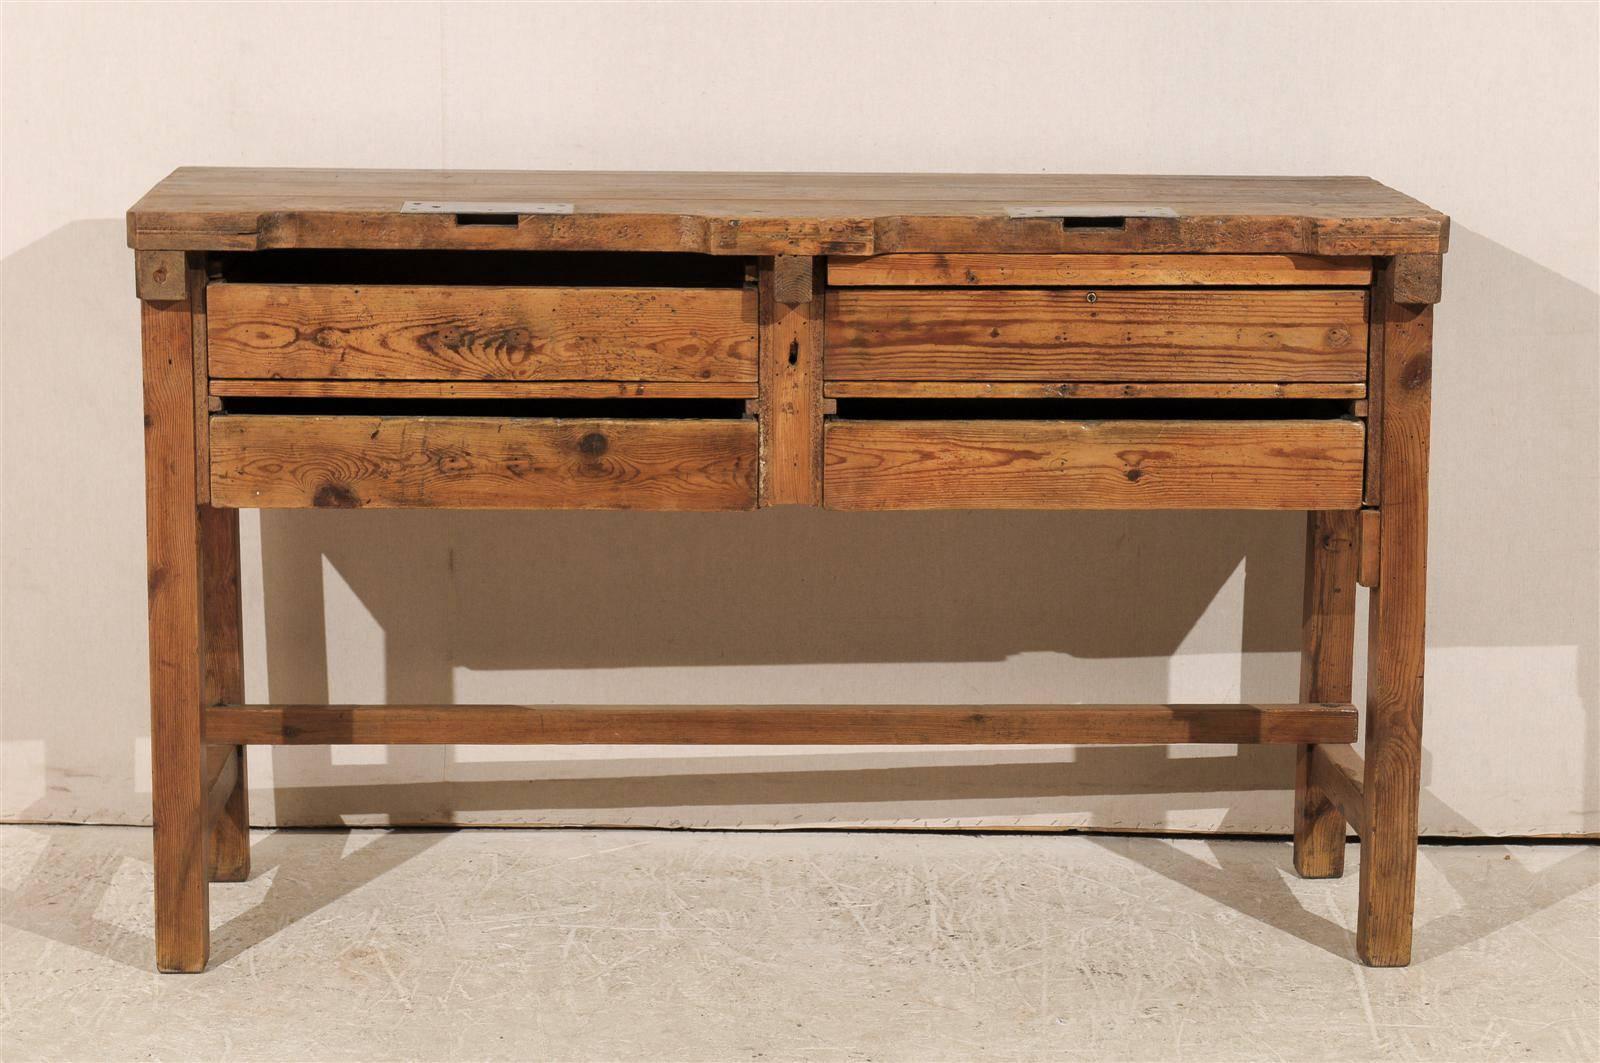 A 19th century jeweler's table or work bench.

This jeweler's table features a very linear and rustic profile. It has four drawers located in its front part separated with two pull-out shelves. Its legs are straight and joined by side stretchers.